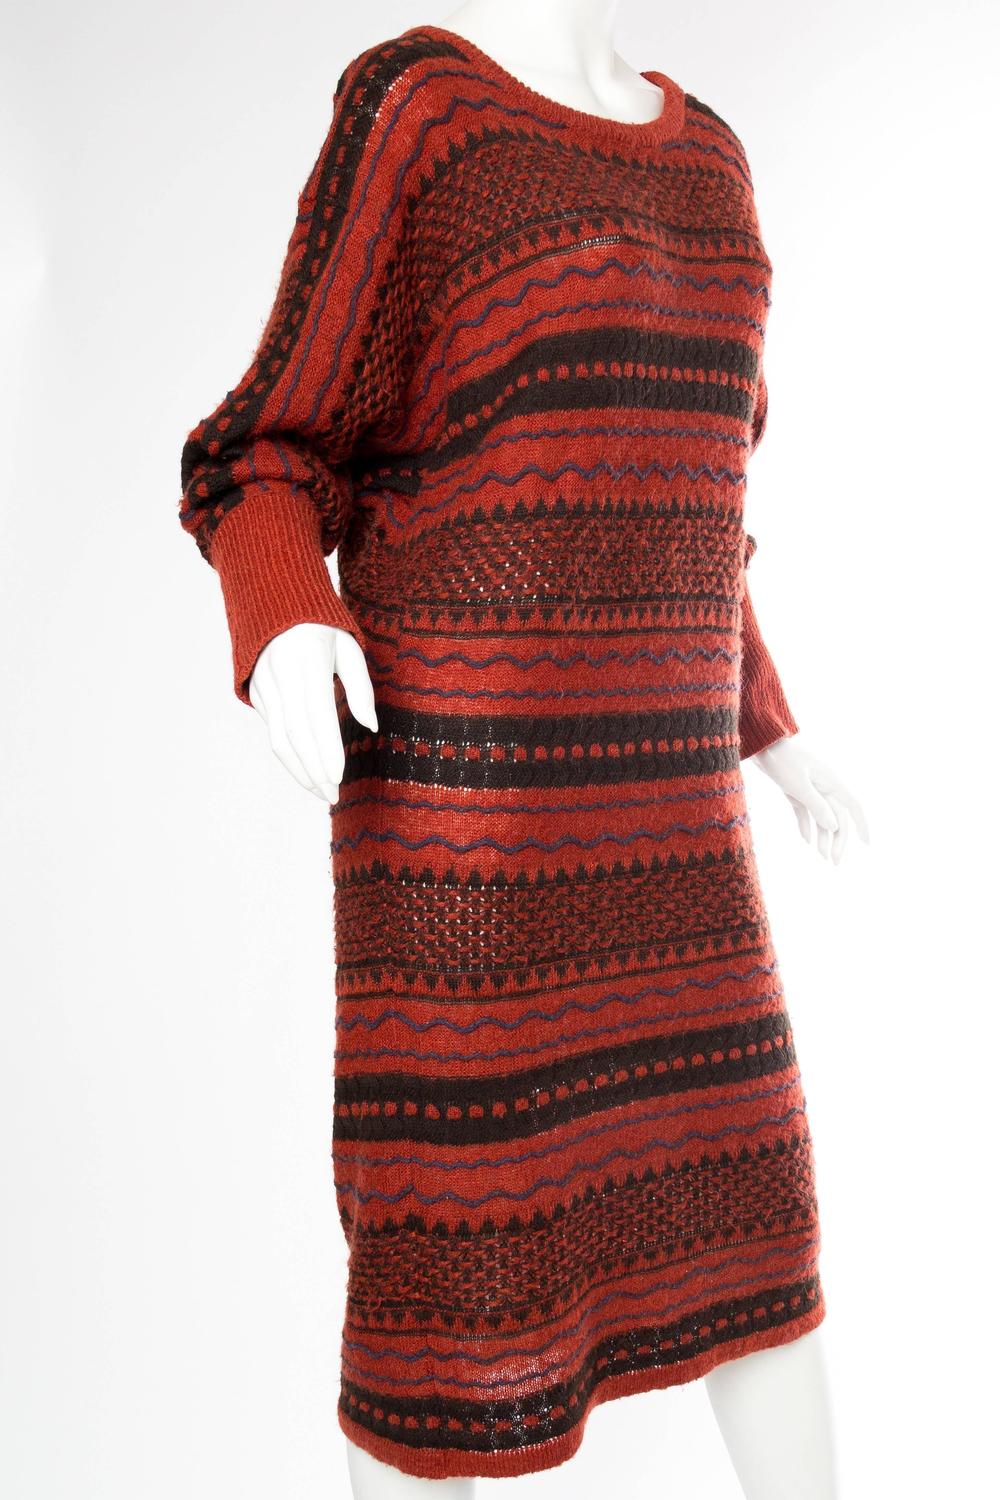 Rare Early Issey Miyake 1970s Knit Sweater Dress For Sale at 1stdibs